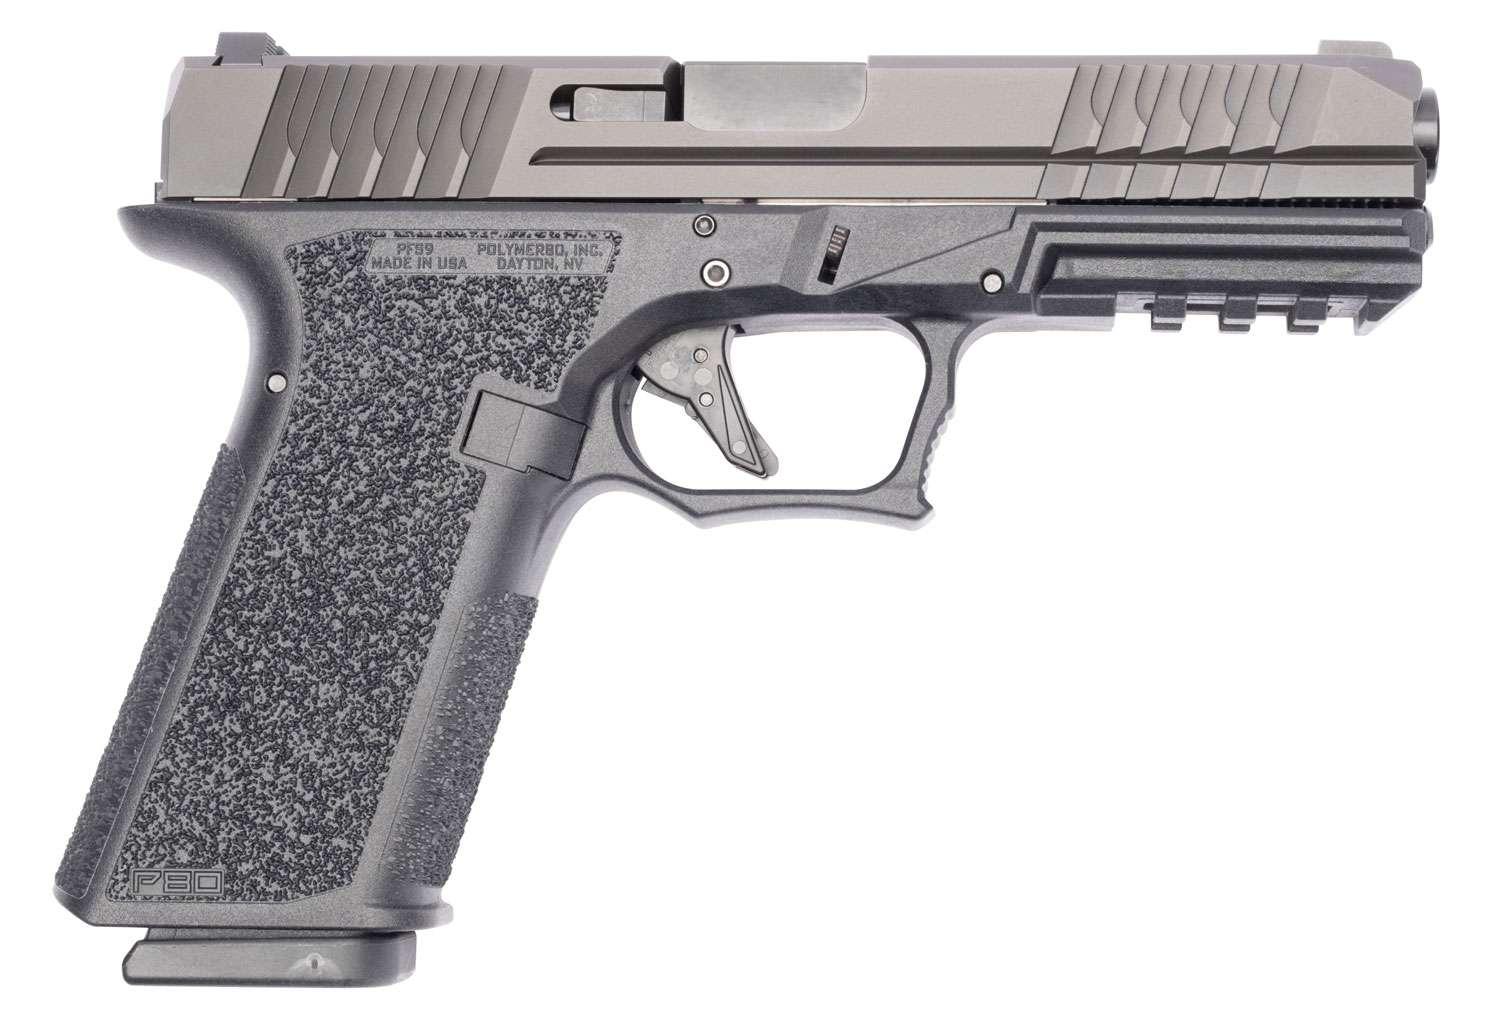 Polymer80 PFS9 Full Size 9mm 4.49" 17+1 Black Aggressive Textured Black Polymer Grip - $308.25 (use the Email For Price button to get this price)